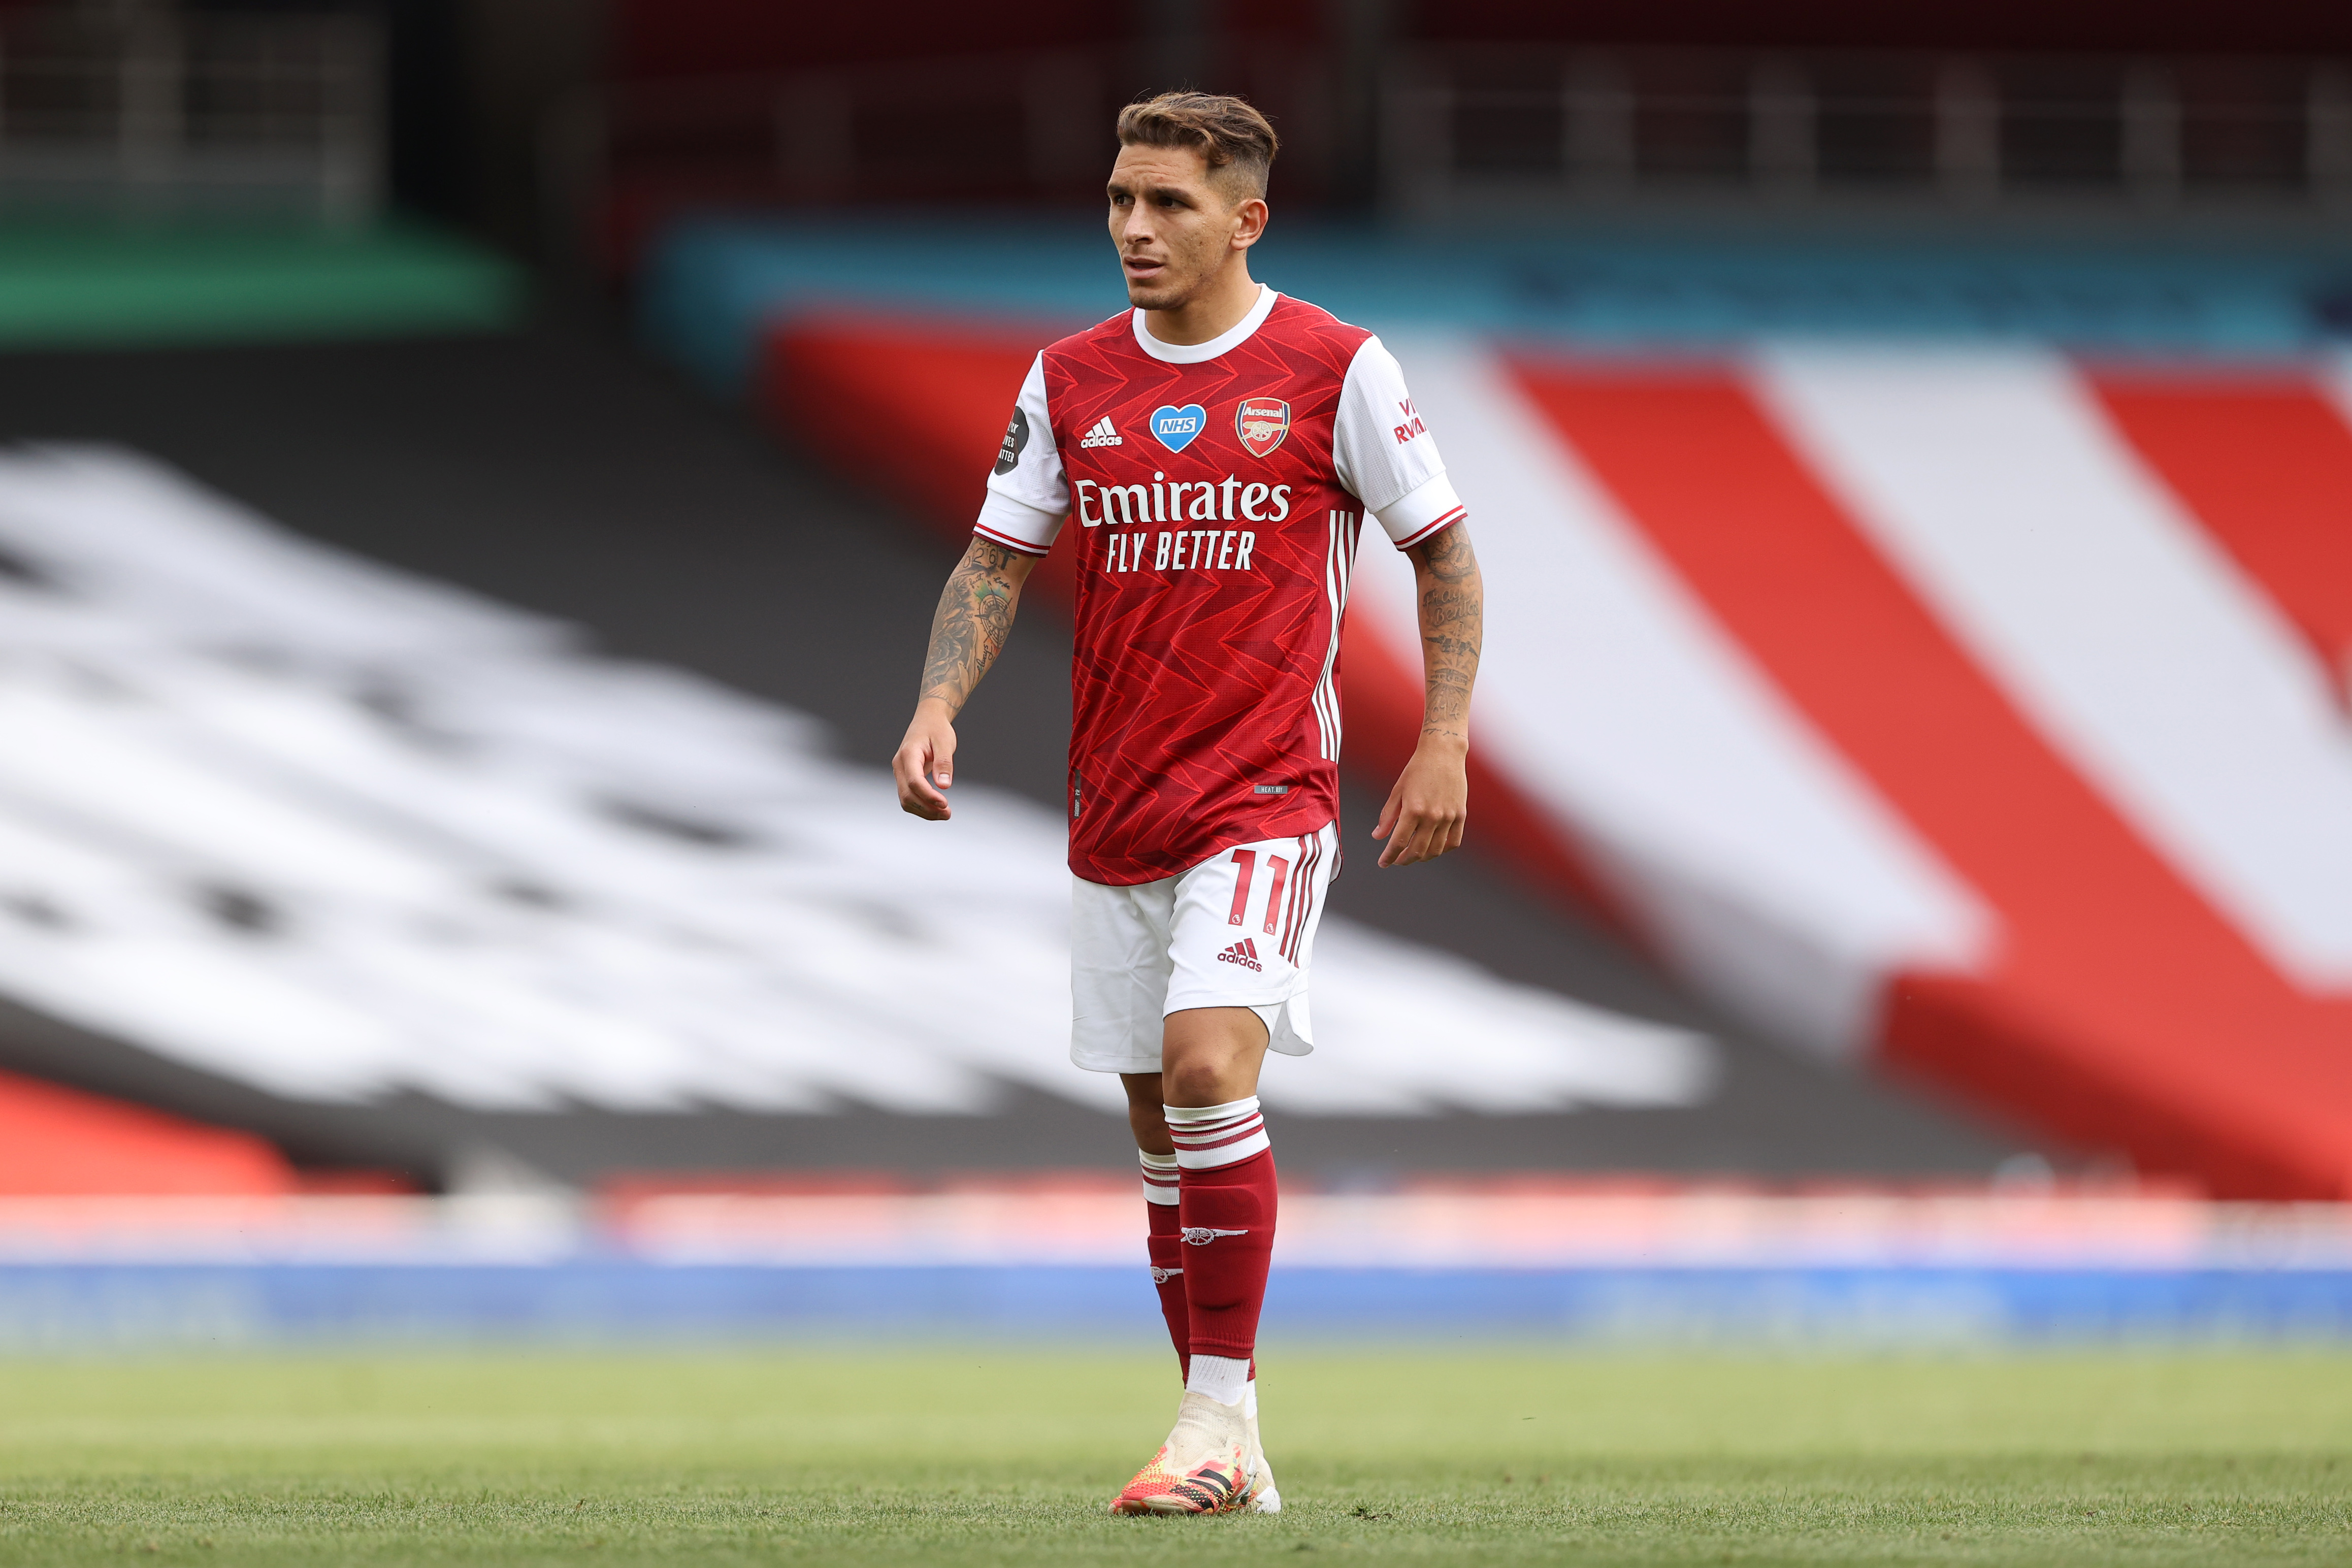 Torreira joins Atletico Madrid on loan from Arsenal